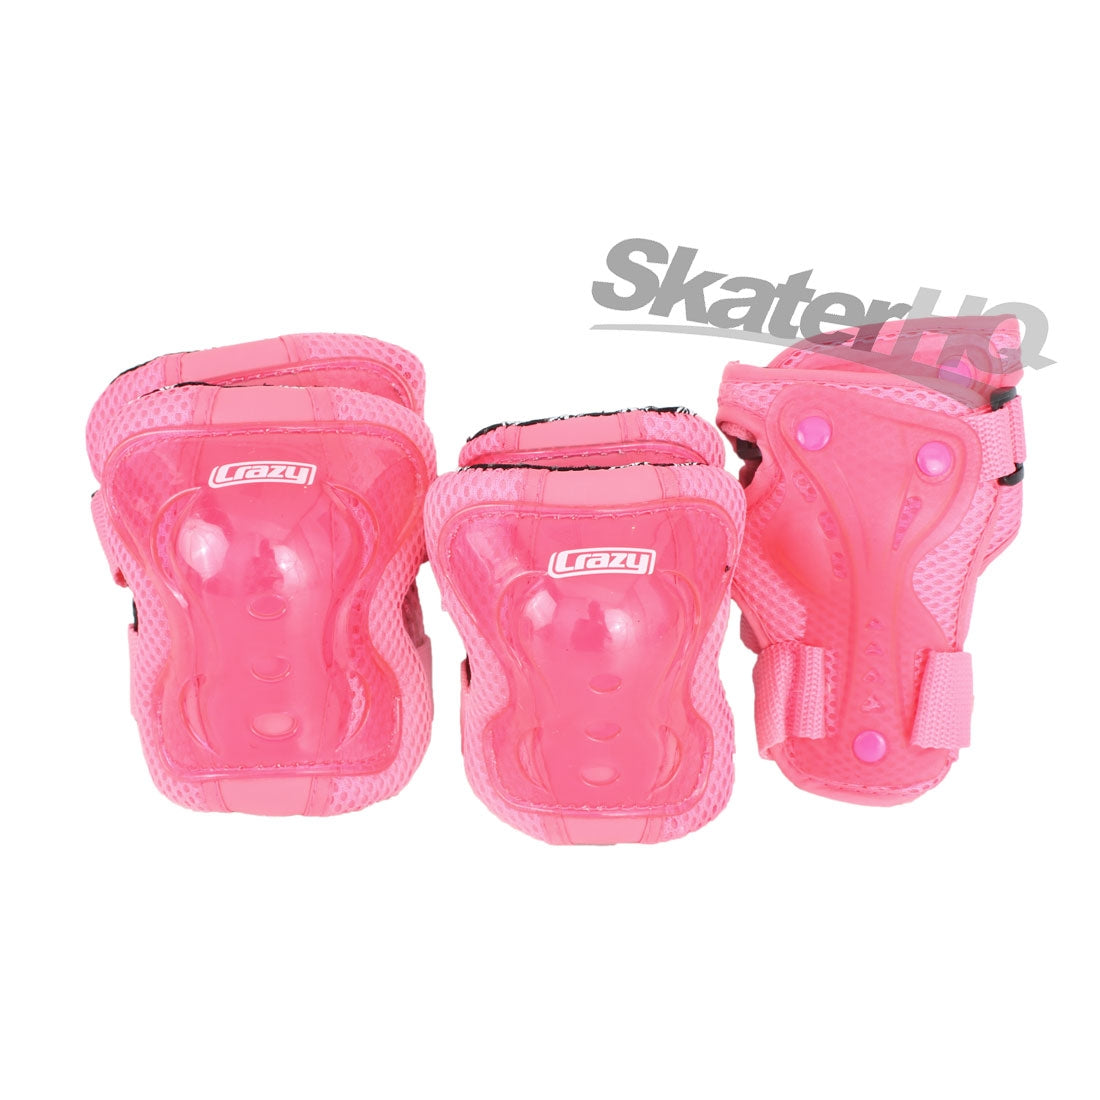 Crazy ProteXion Kids Tri-Pack - Pink Protective Gear